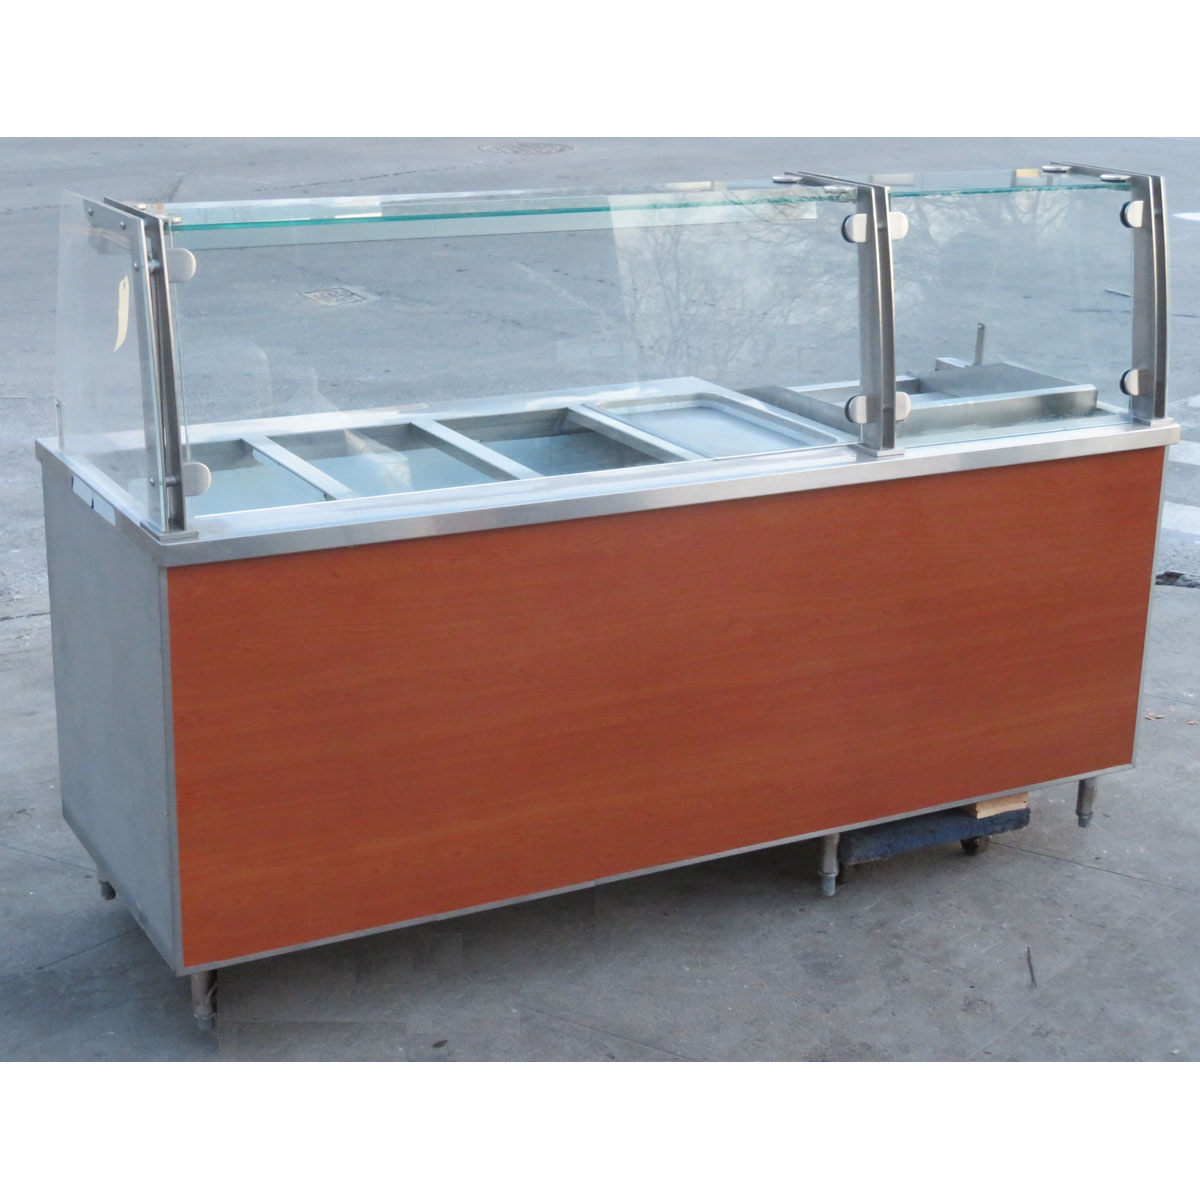 Custom Cool Hot Food Bain Marie & Griddle, Used Great Condition